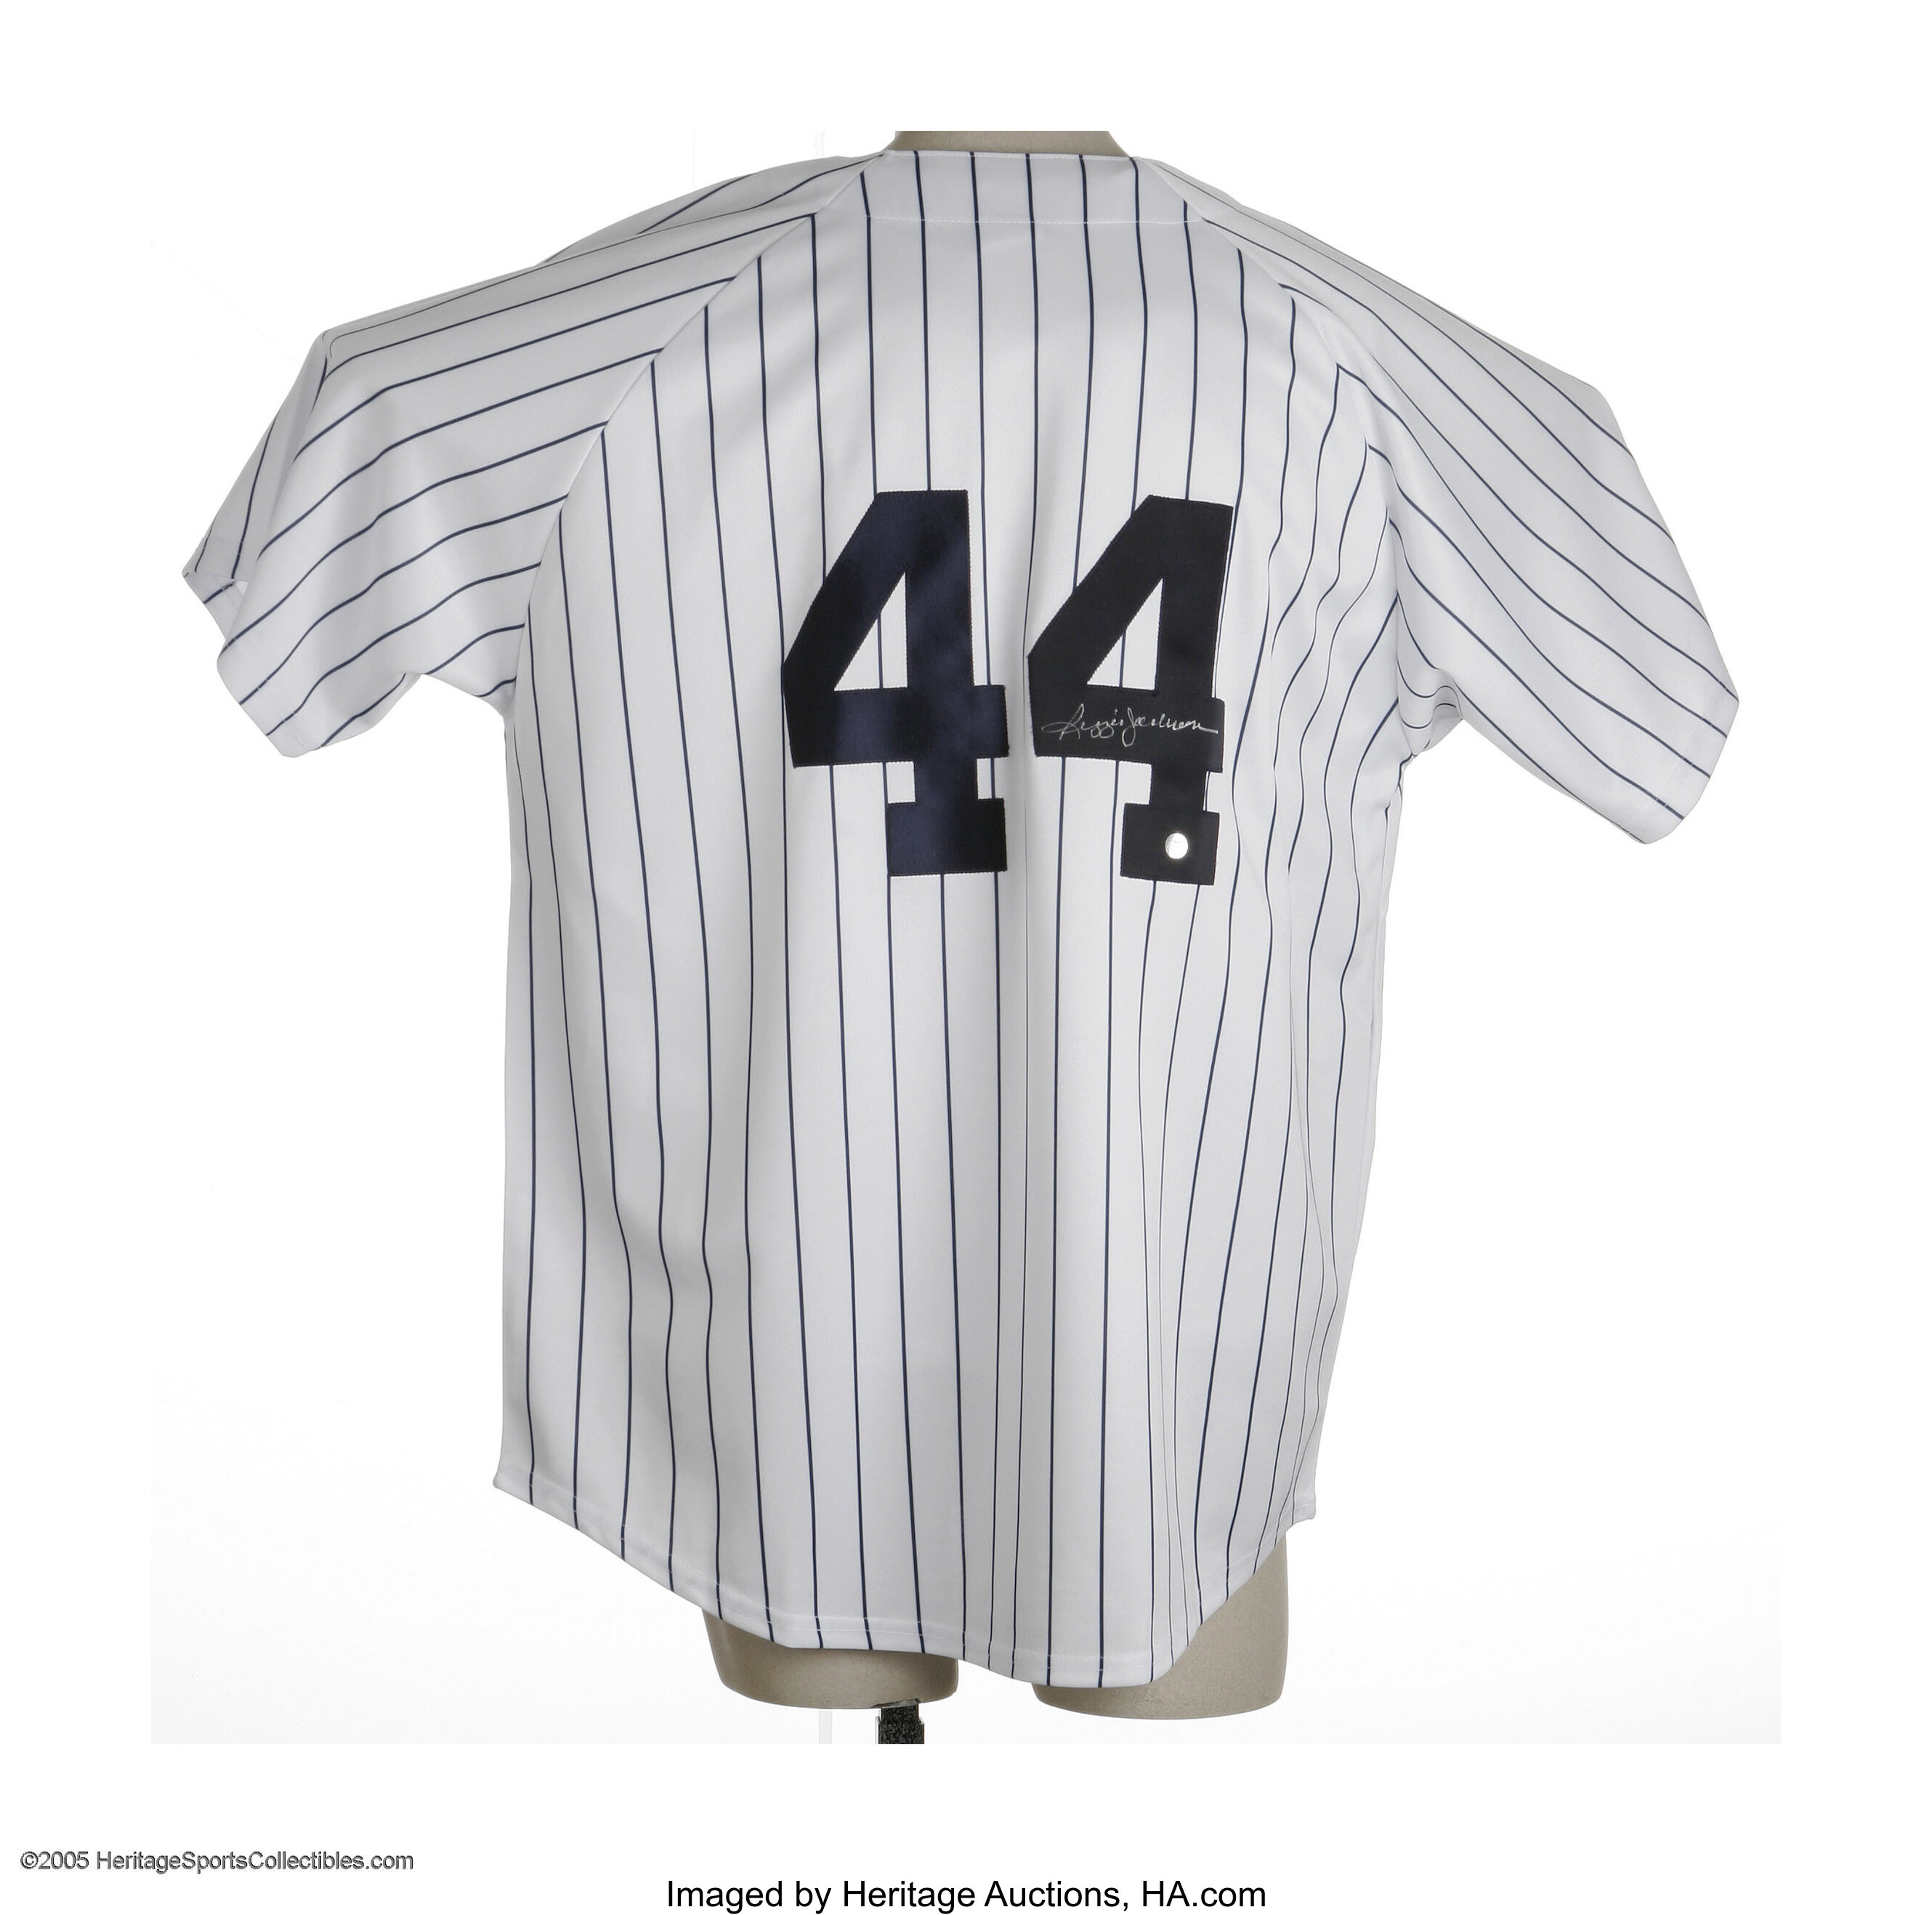 Reggie Jackson Signed Jersey. Number 44 on the back of a, Lot #10127